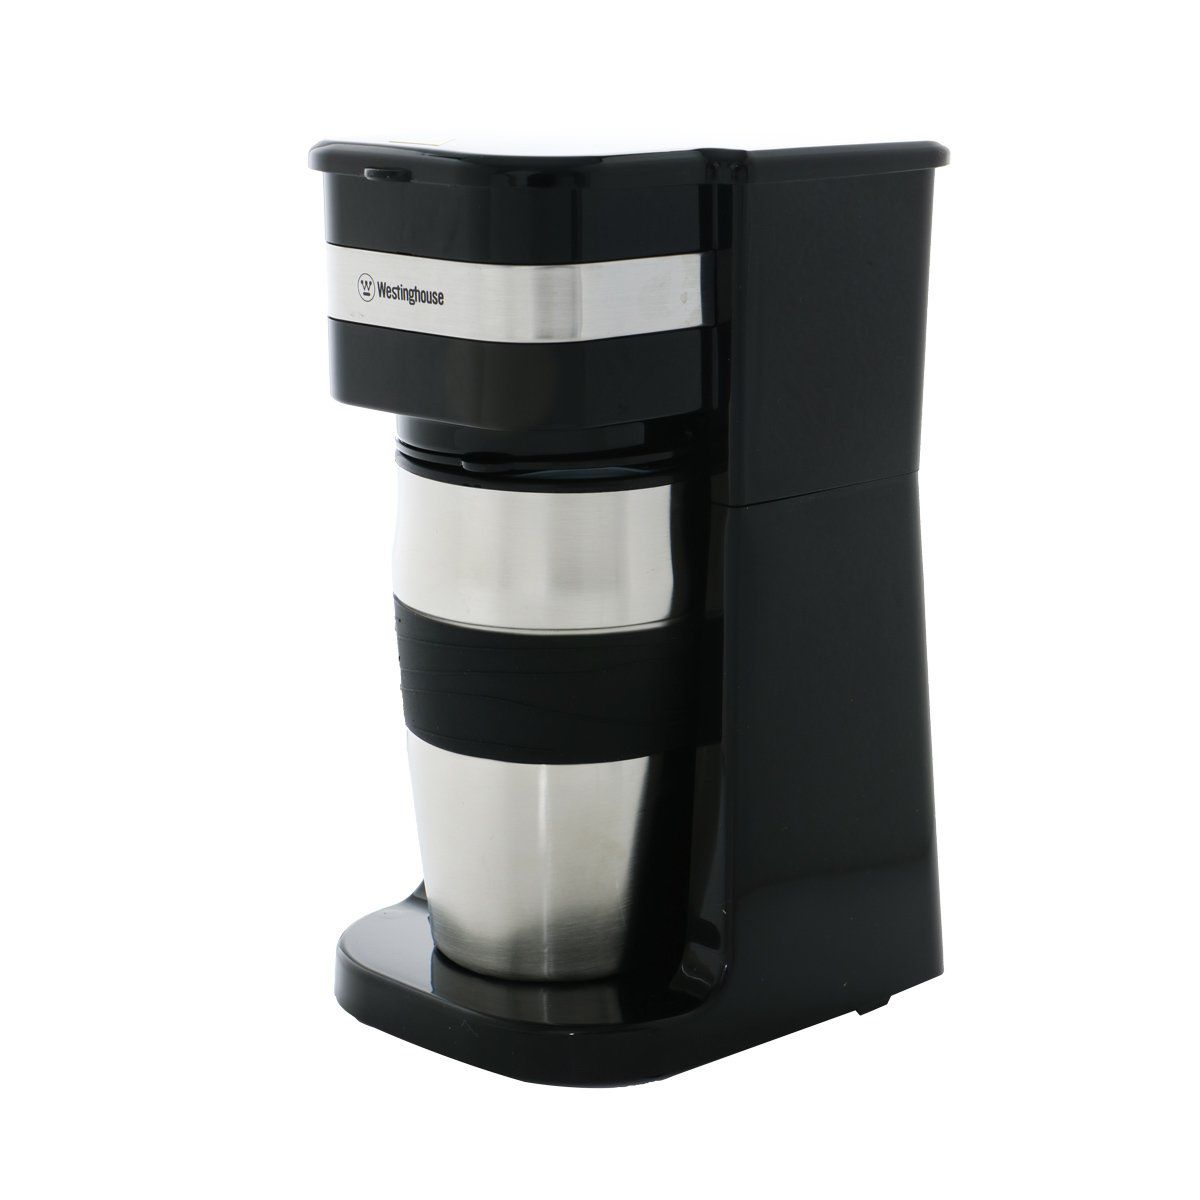 Cafetera Wh/ Cafetera Retro Black Westinghouse